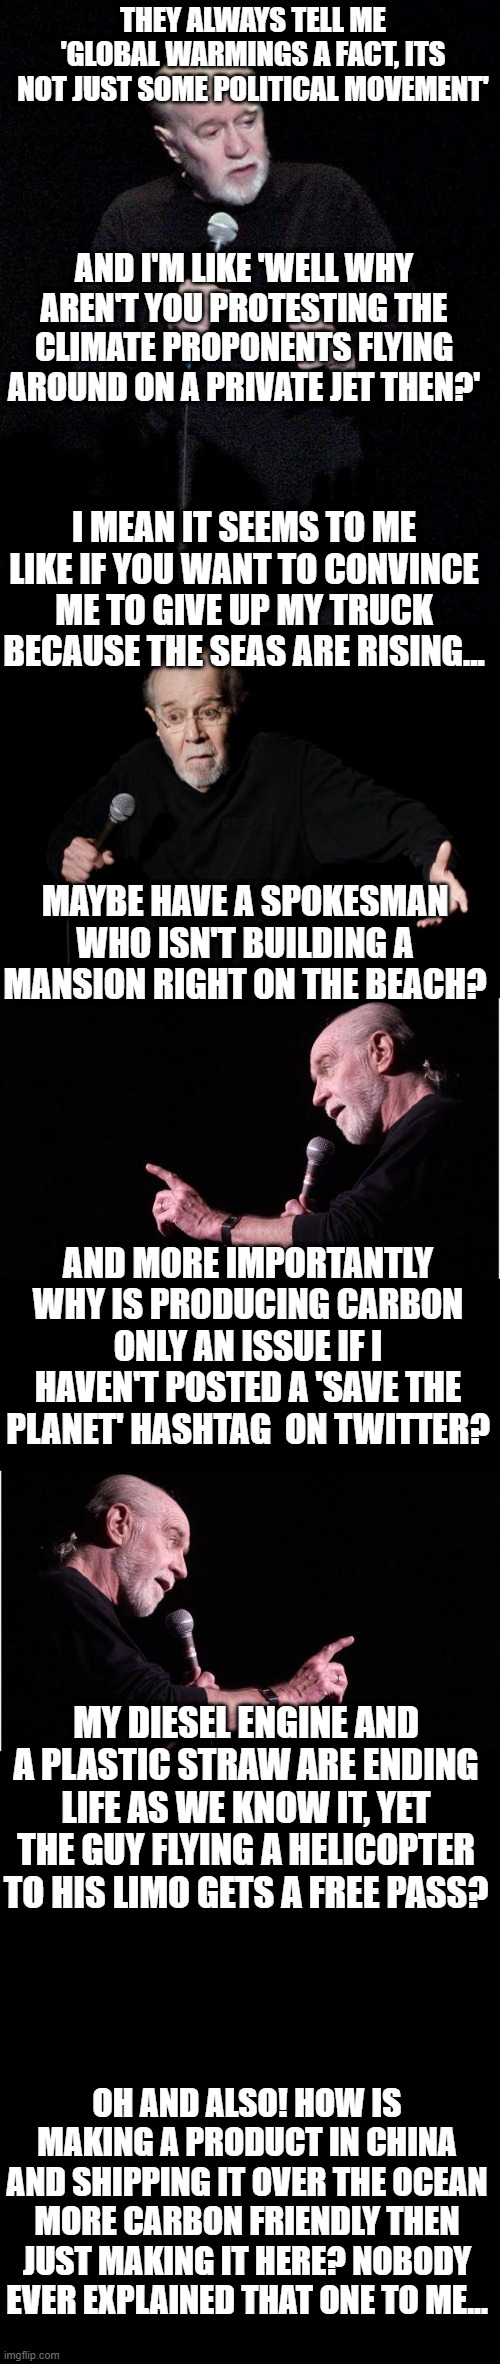 THEY ALWAYS TELL ME 'GLOBAL WARMINGS A FACT, ITS NOT JUST SOME POLITICAL MOVEMENT'; AND I'M LIKE 'WELL WHY AREN'T YOU PROTESTING THE CLIMATE PROPONENTS FLYING AROUND ON A PRIVATE JET THEN?'; I MEAN IT SEEMS TO ME LIKE IF YOU WANT TO CONVINCE ME TO GIVE UP MY TRUCK BECAUSE THE SEAS ARE RISING... MAYBE HAVE A SPOKESMAN WHO ISN'T BUILDING A MANSION RIGHT ON THE BEACH? AND MORE IMPORTANTLY WHY IS PRODUCING CARBON ONLY AN ISSUE IF I HAVEN'T POSTED A 'SAVE THE PLANET' HASHTAG  ON TWITTER? MY DIESEL ENGINE AND A PLASTIC STRAW ARE ENDING LIFE AS WE KNOW IT, YET THE GUY FLYING A HELICOPTER TO HIS LIMO GETS A FREE PASS? OH AND ALSO! HOW IS MAKING A PRODUCT IN CHINA AND SHIPPING IT OVER THE OCEAN MORE CARBON FRIENDLY THEN JUST MAKING IT HERE? NOBODY EVER EXPLAINED THAT ONE TO ME... | image tagged in george carlin | made w/ Imgflip meme maker